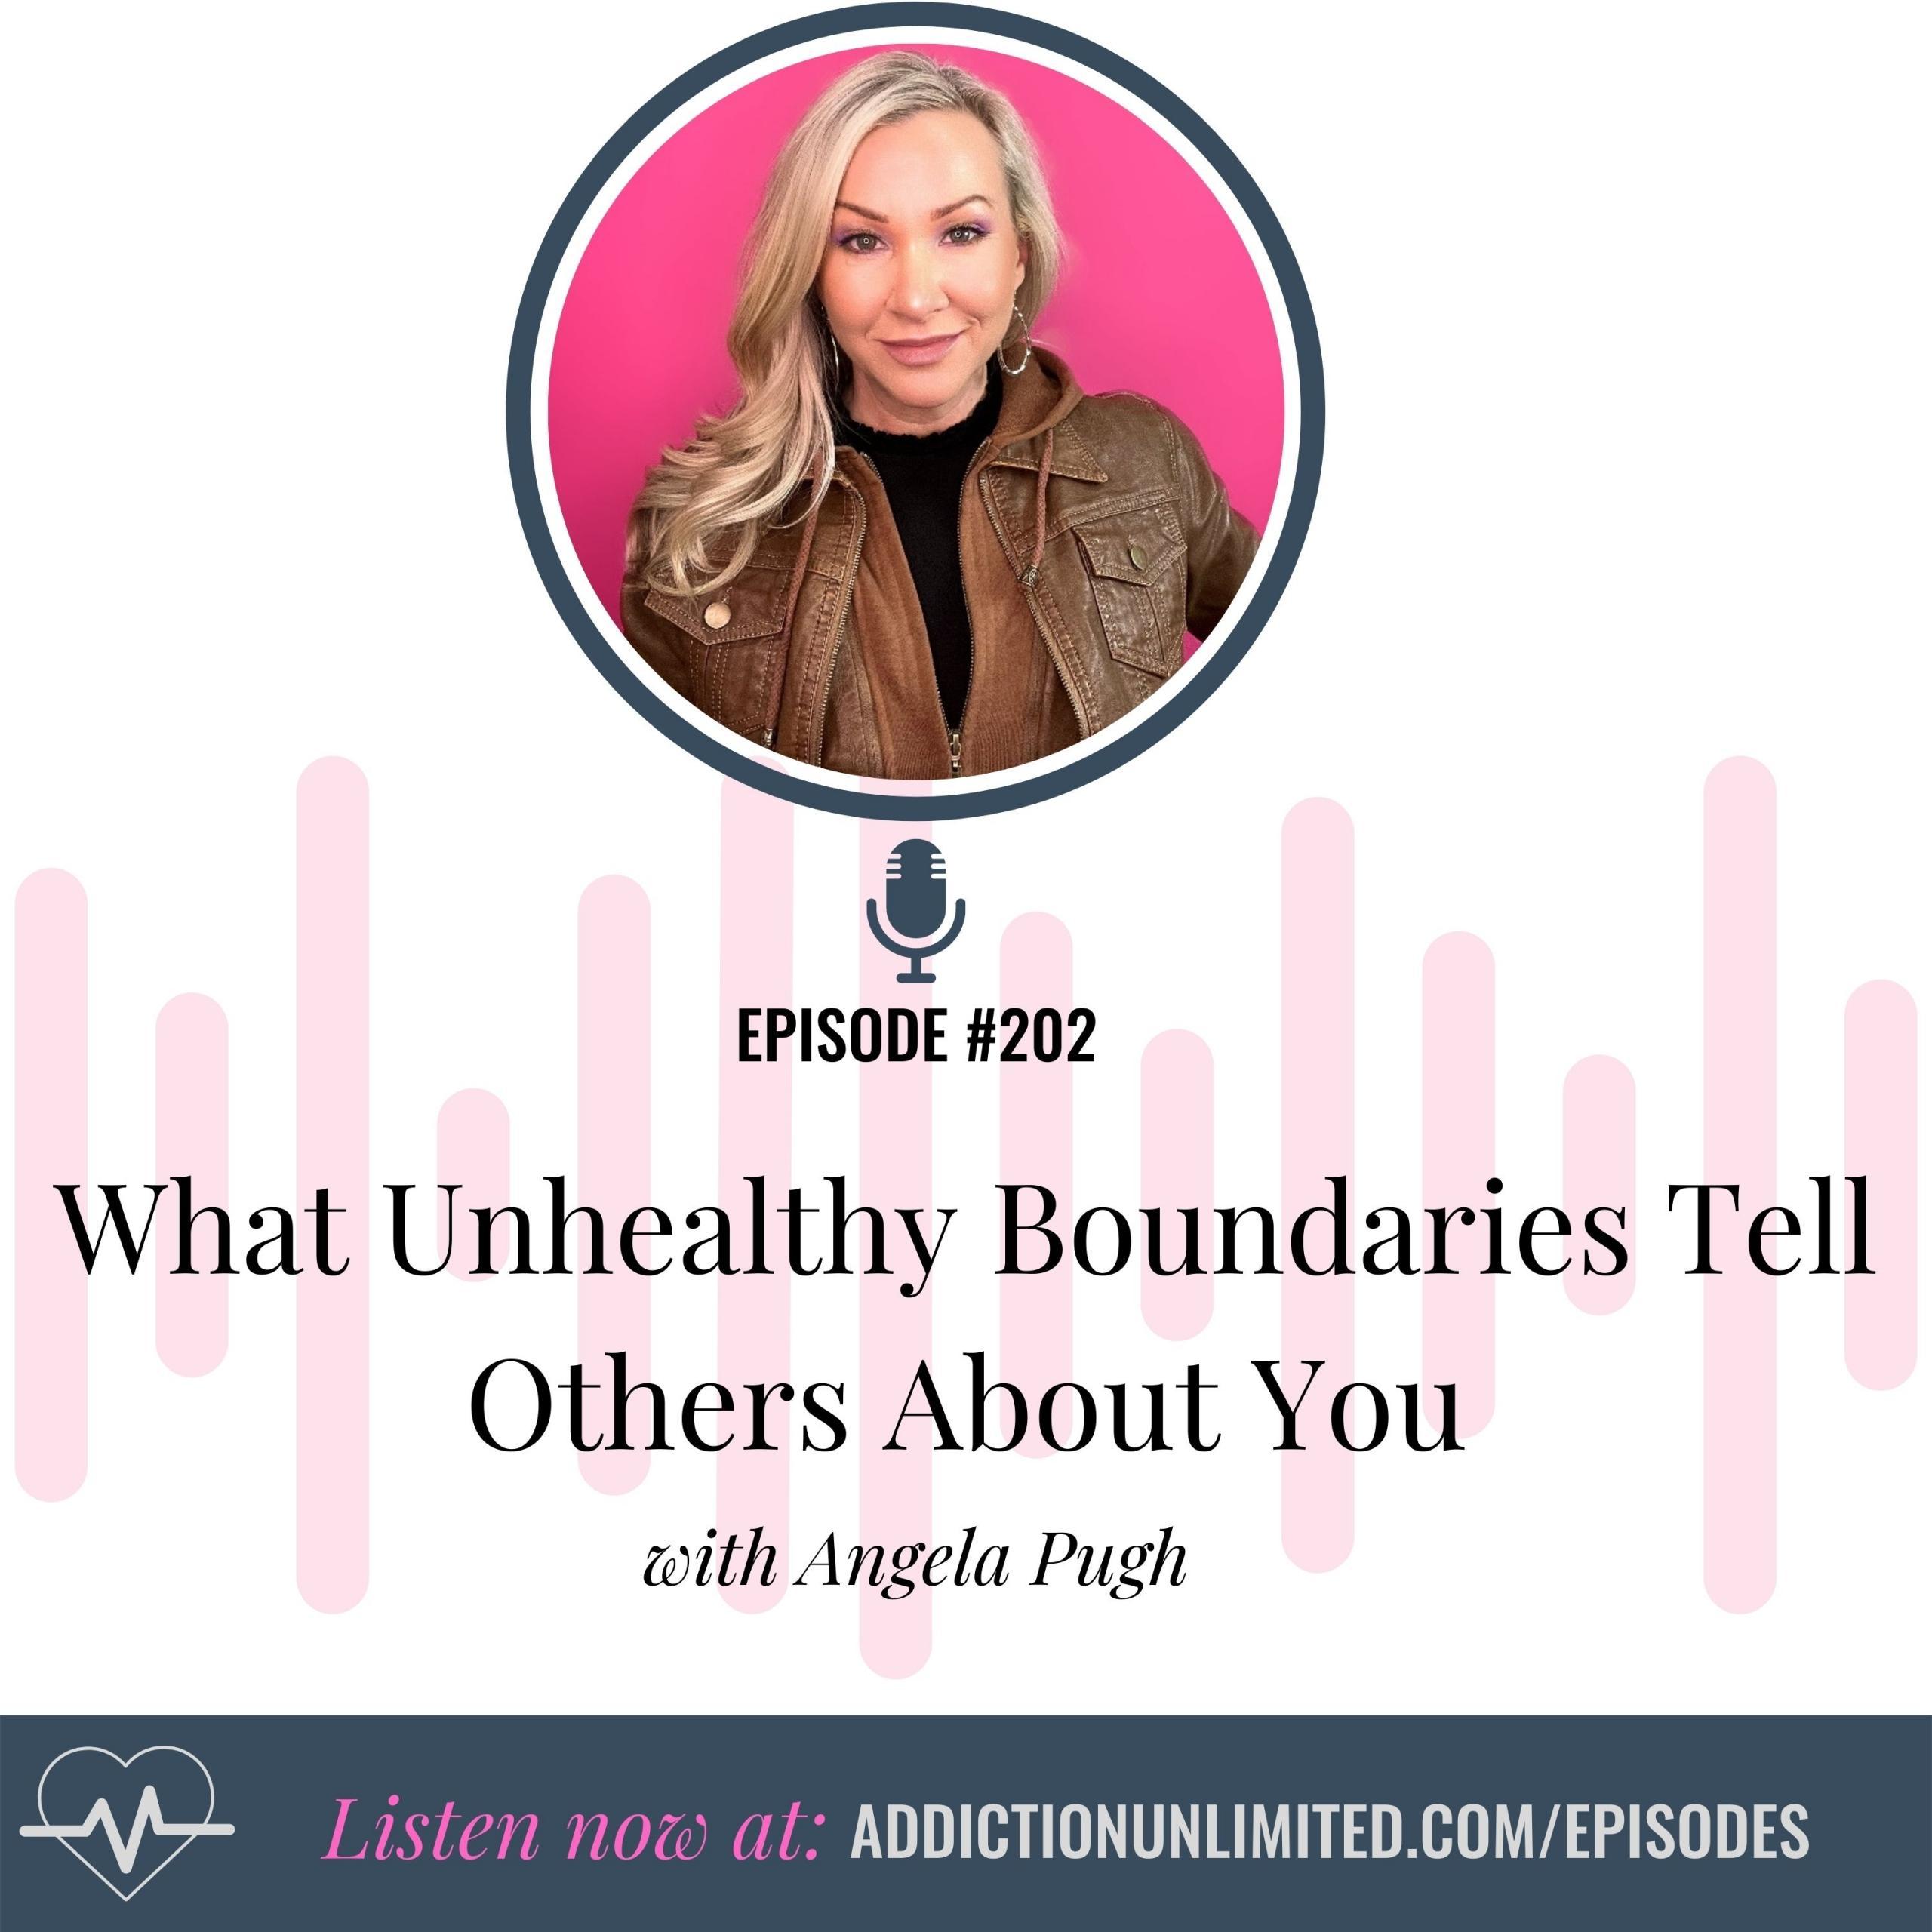 What Unhealthy Boundaries Tell Others About You